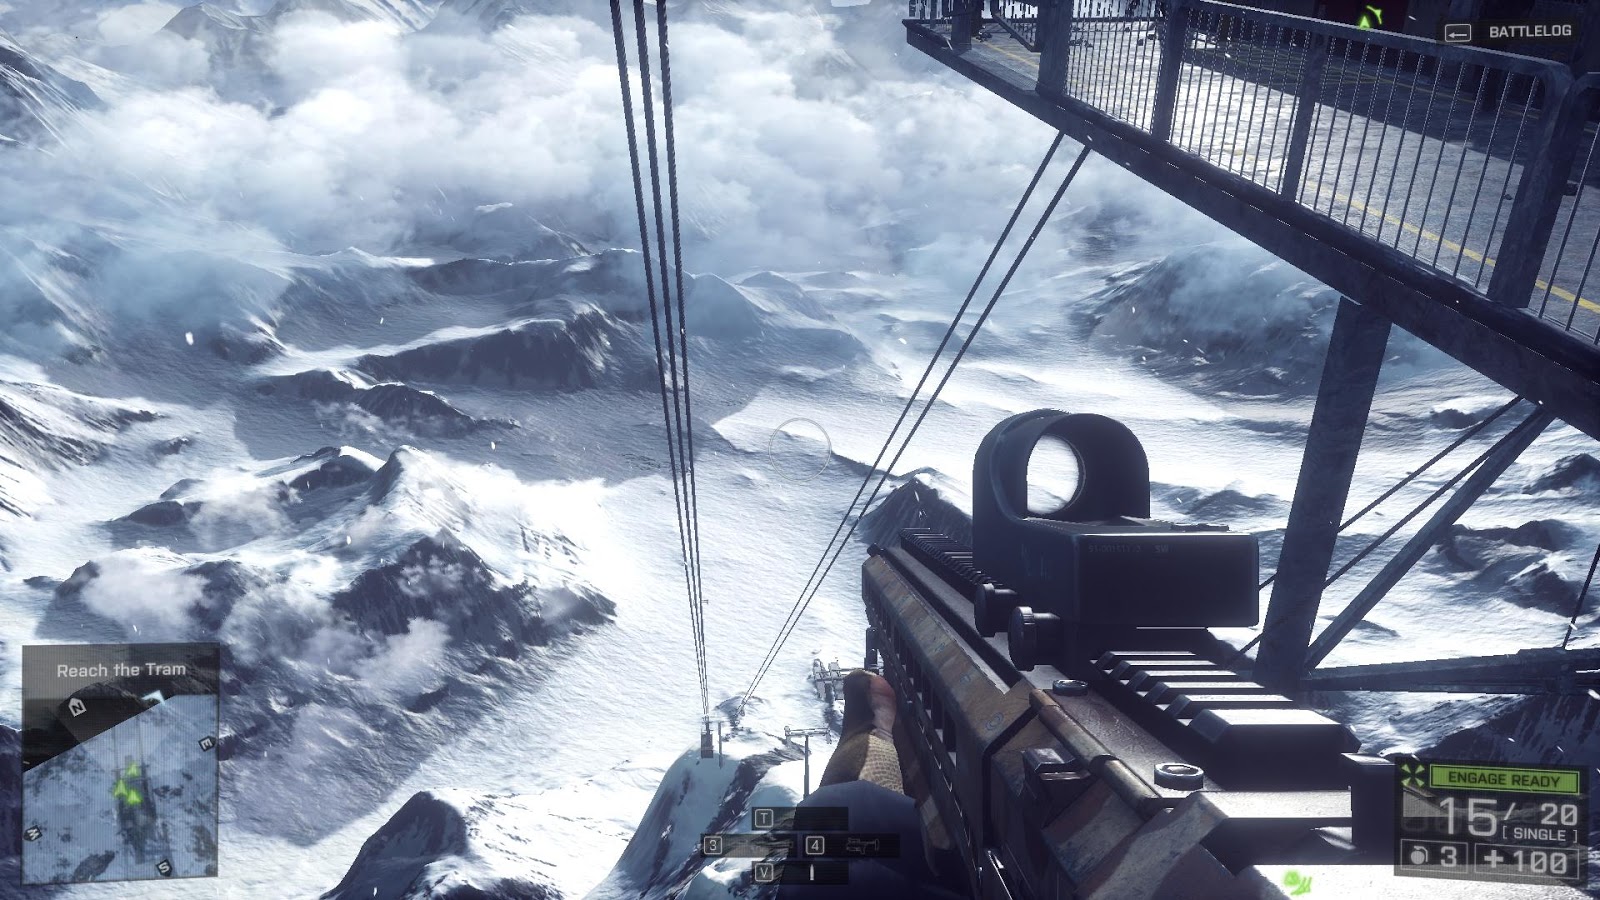 Advanced Technique To Take Even More Beautiful Battlefield 4 Screenshots –  Diary of Dennis